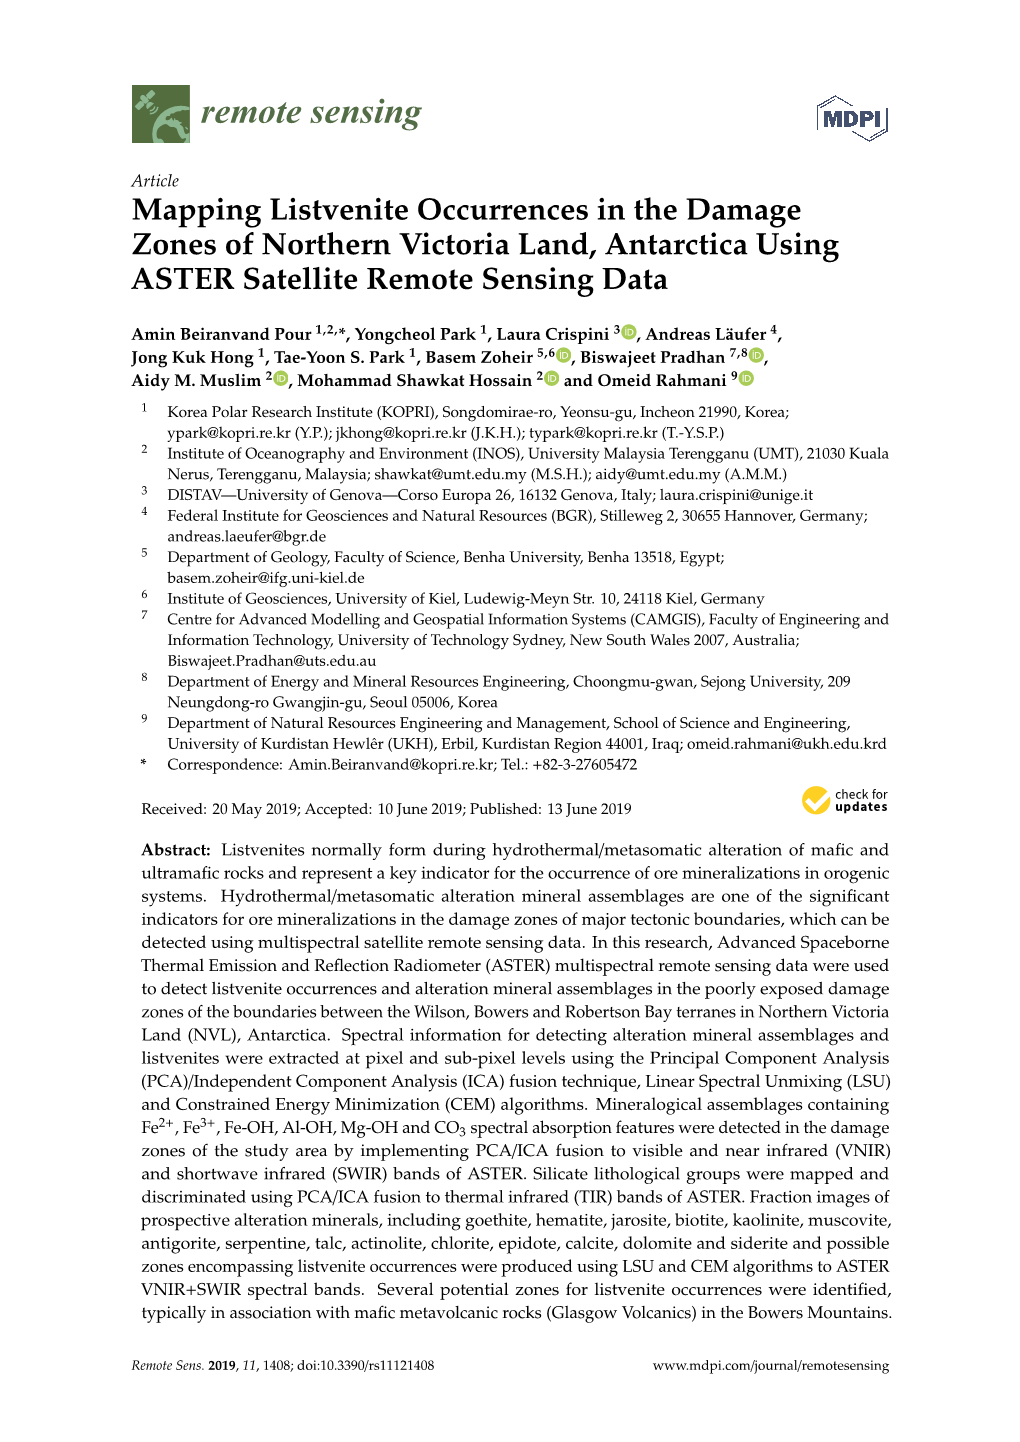 Mapping Listvenite Occurrences in the Damage Zones of Northern Victoria Land, Antarctica Using ASTER Satellite Remote Sensing Data